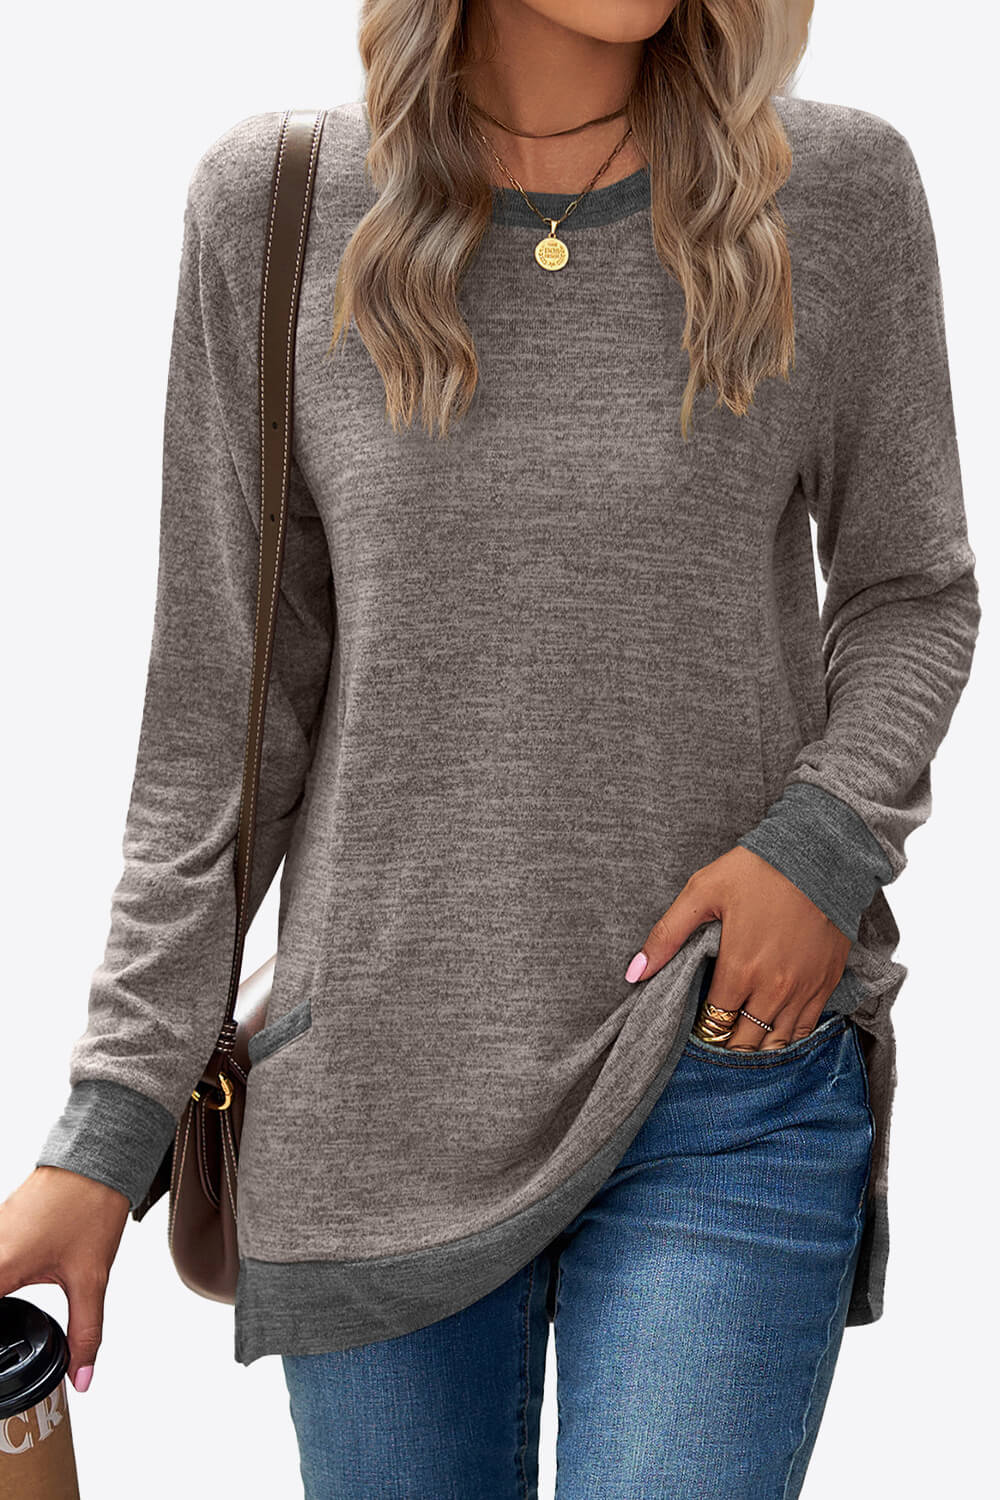 Heathered Slit Top with Pockets - Brown / S - T-Shirts - Shirts & Tops - 1 - 2024